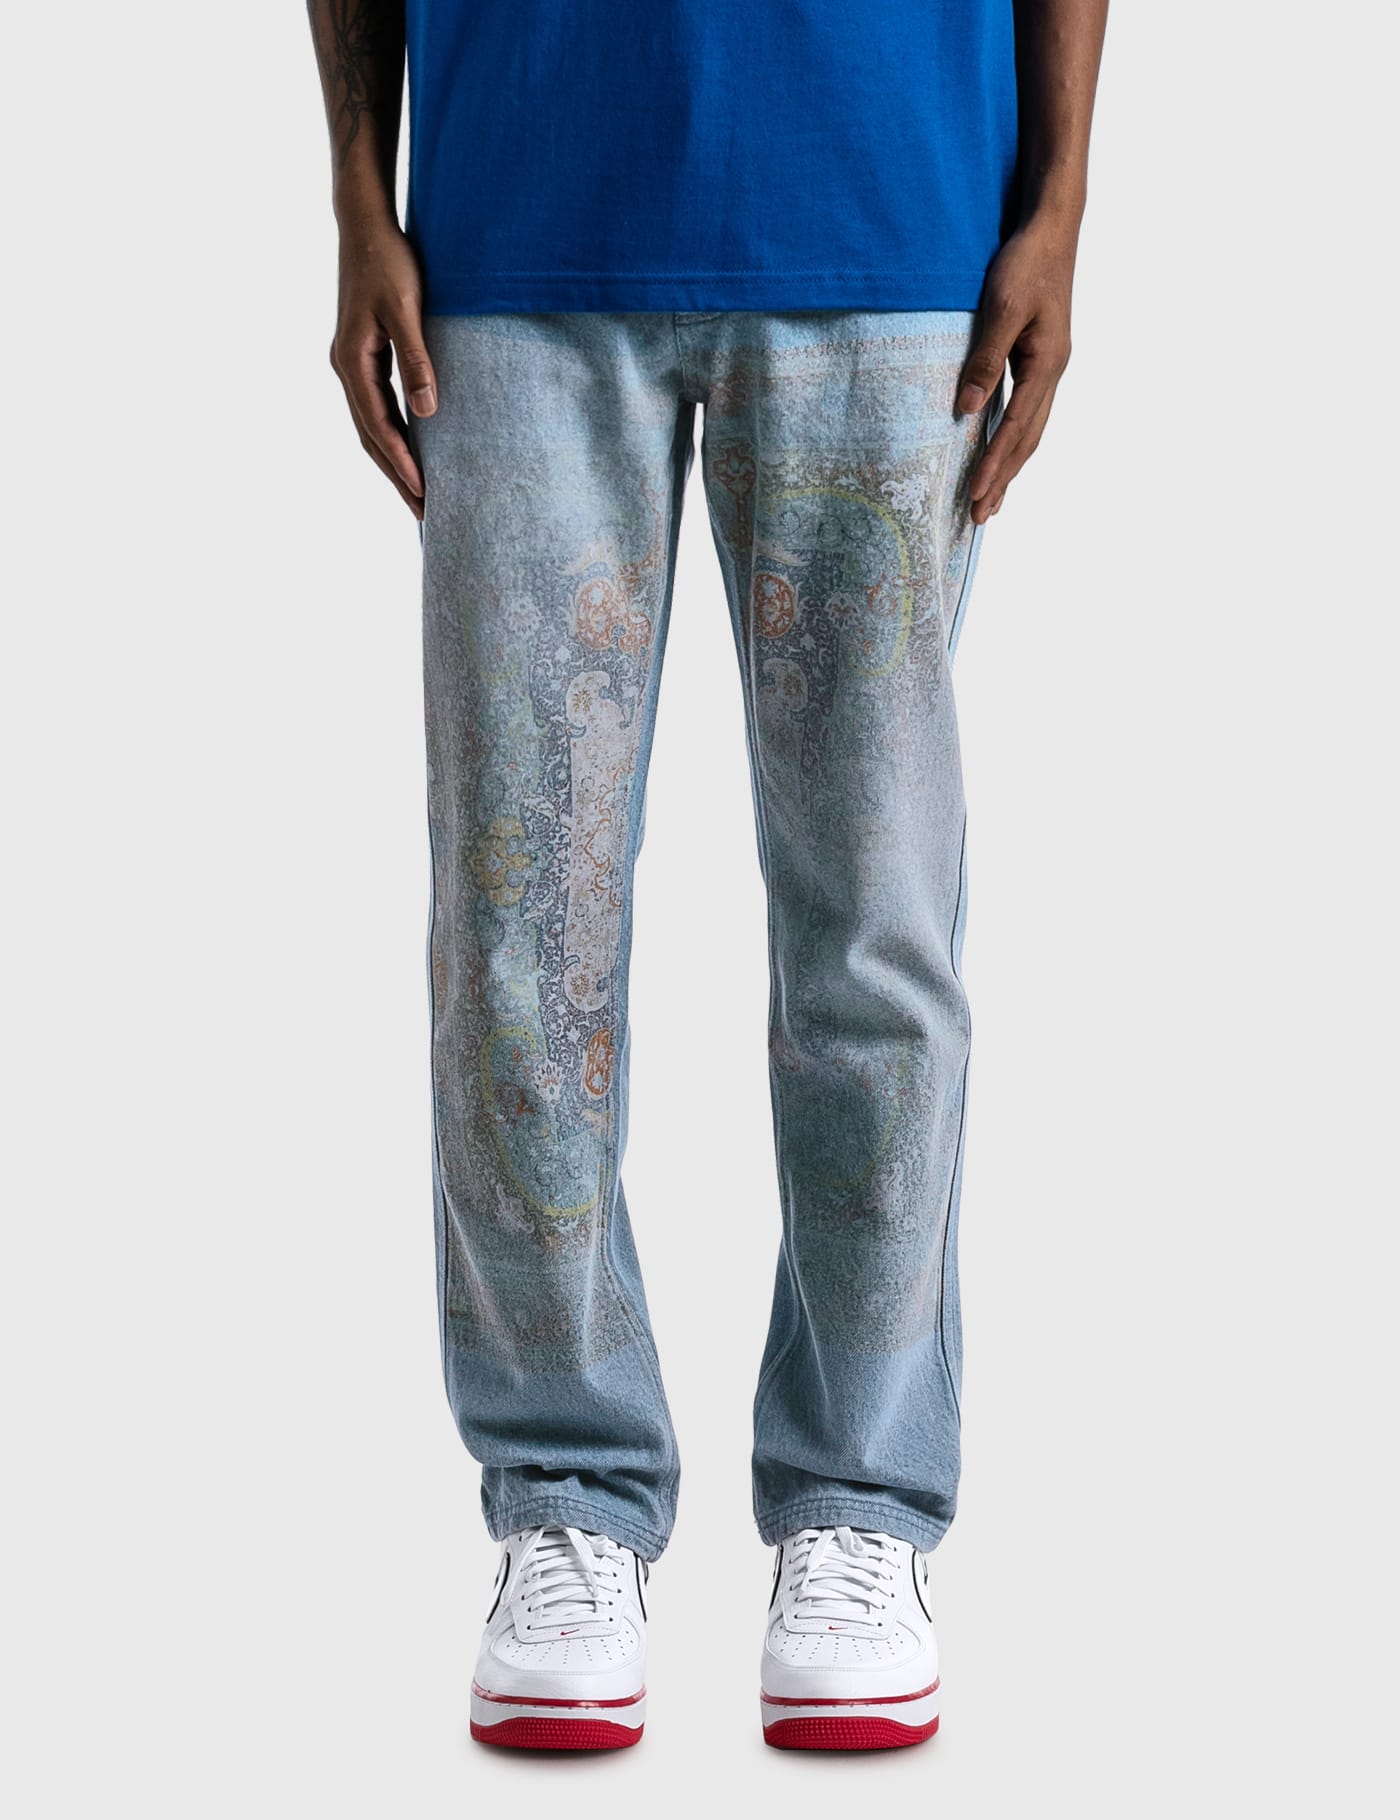 Pleasures - Walk On Me Denim Jeans | HBX - Globally Curated Fashion and  Lifestyle by Hypebeast